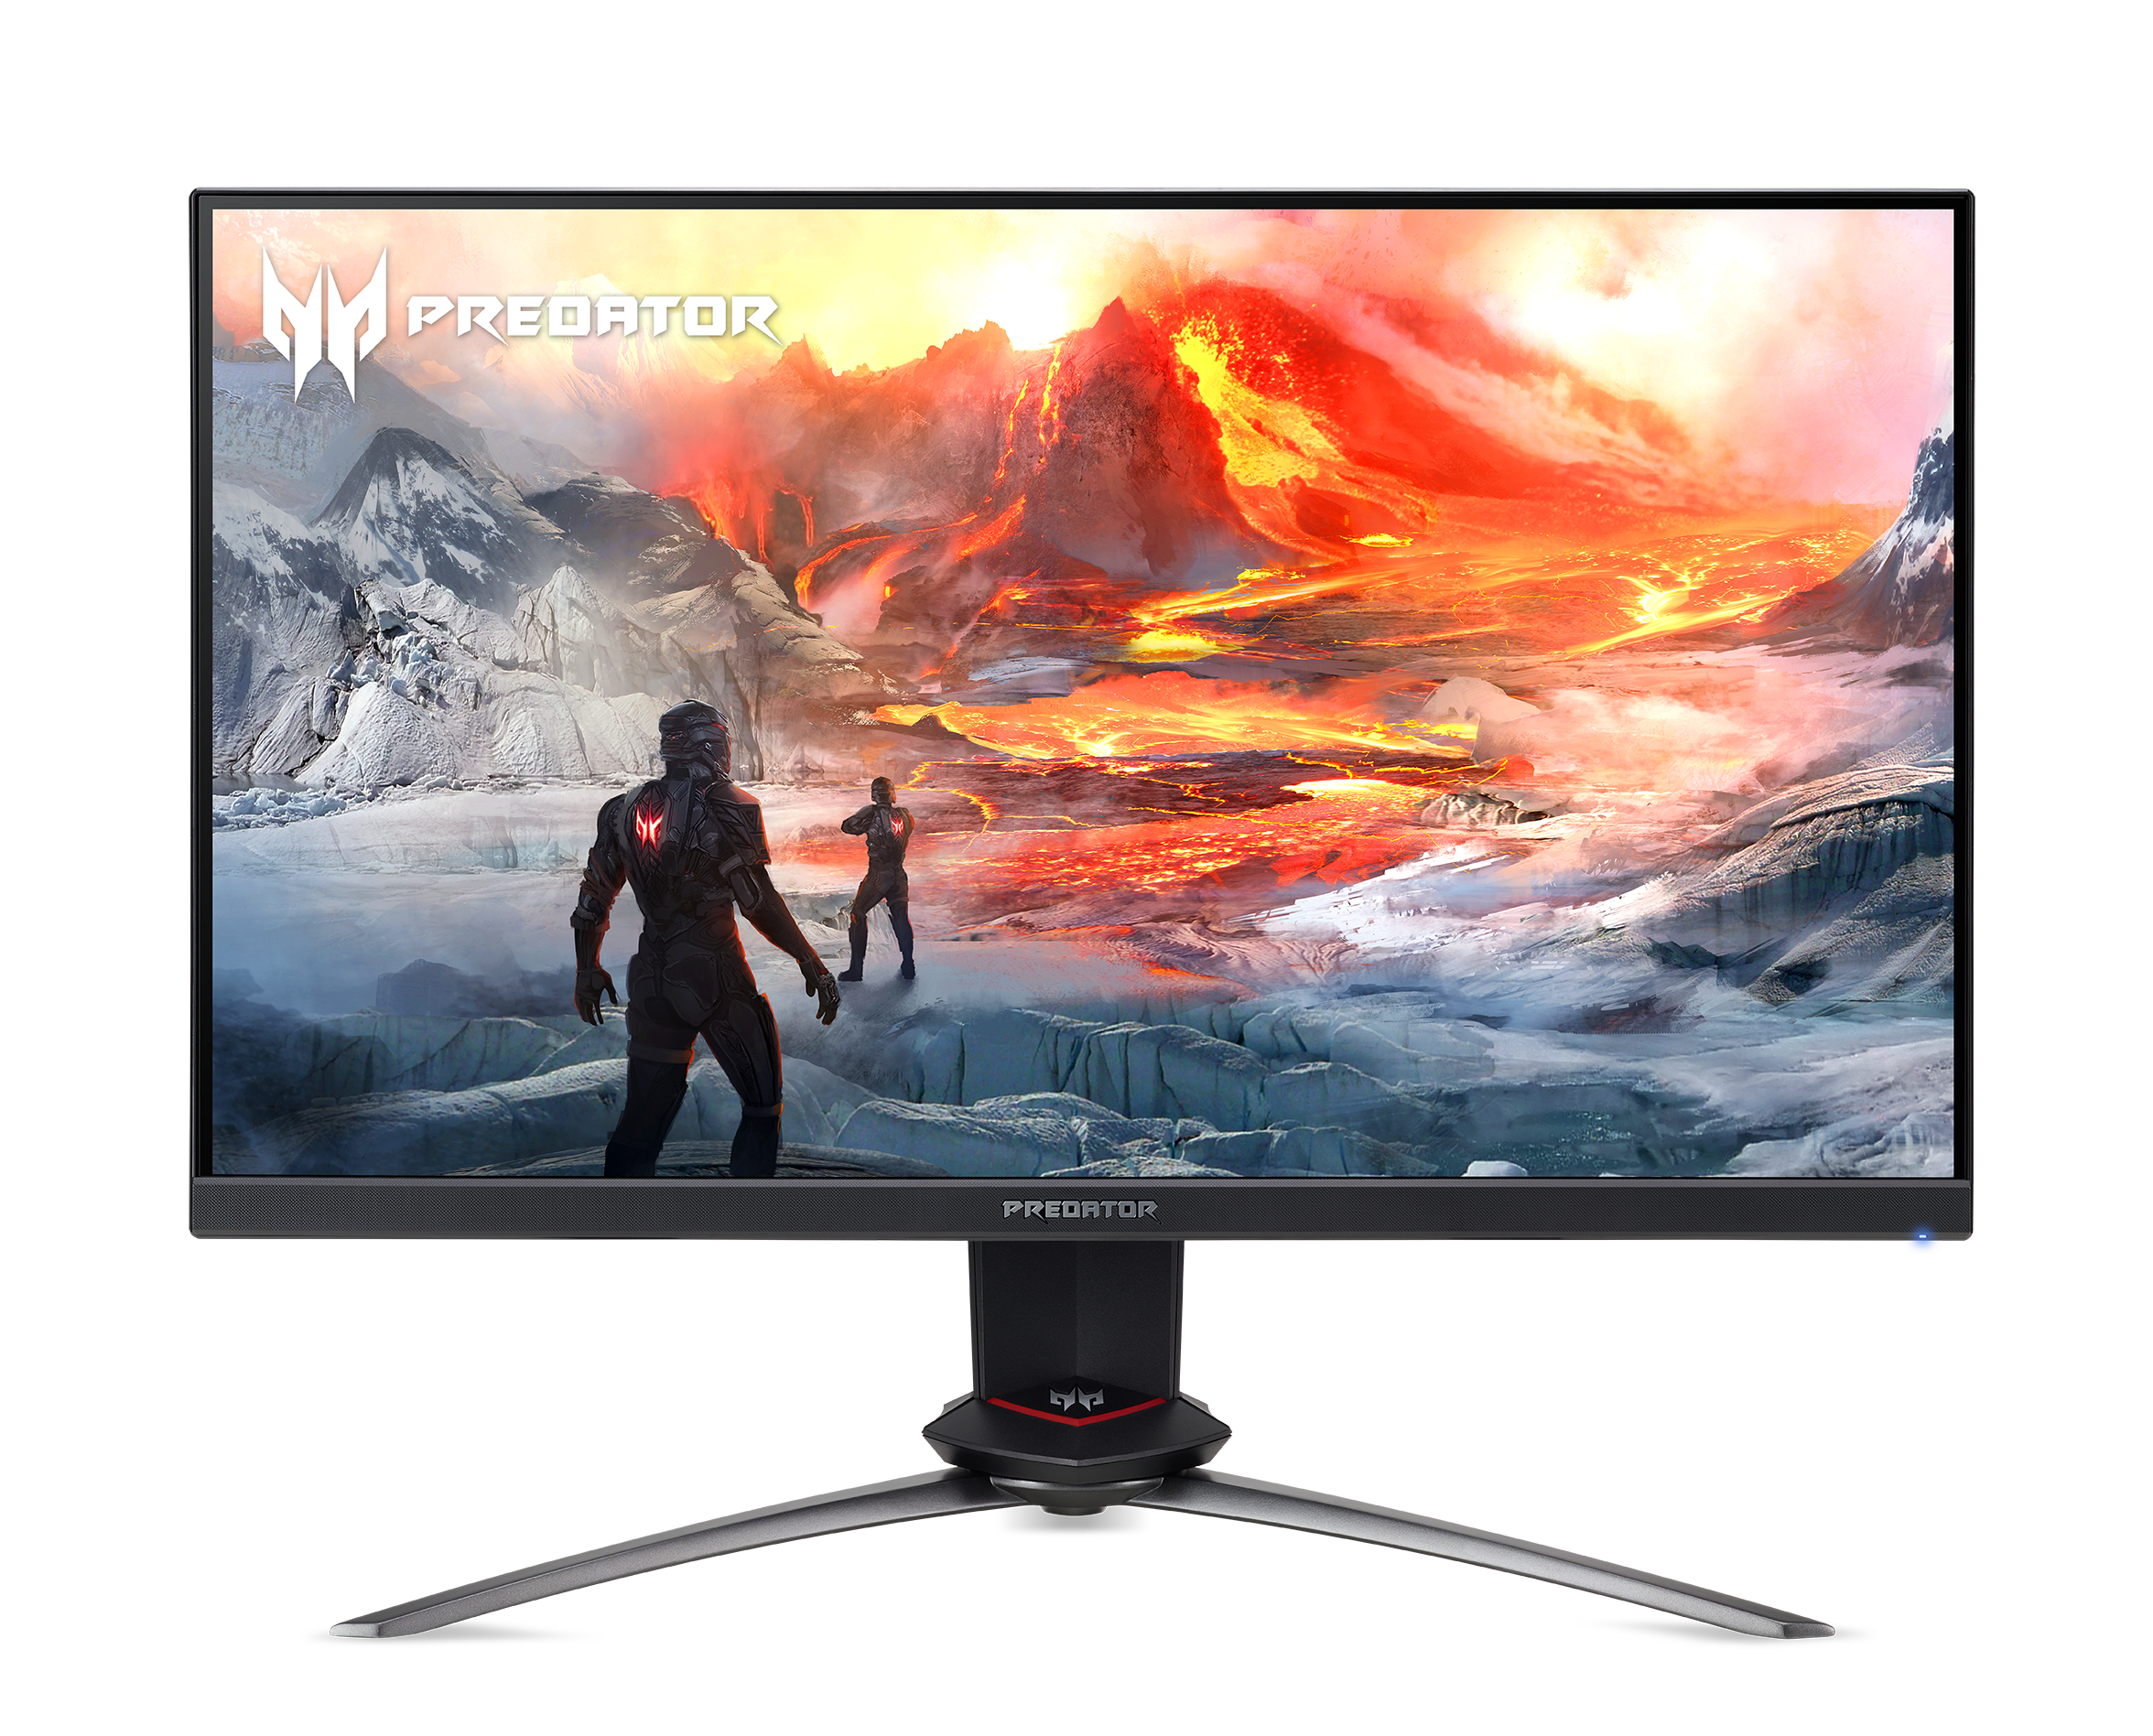 Acer Predator XB273 GZbmiiprx 27" FHD (1920 x 1080) IPS Monitor with NVIDIA G-SYNC Compatible, HDR400, Up to 0.5ms (G to G), Overclock to 280Hz  (1 x Display Port & 2 x HDMI Ports) - image 2 of 9